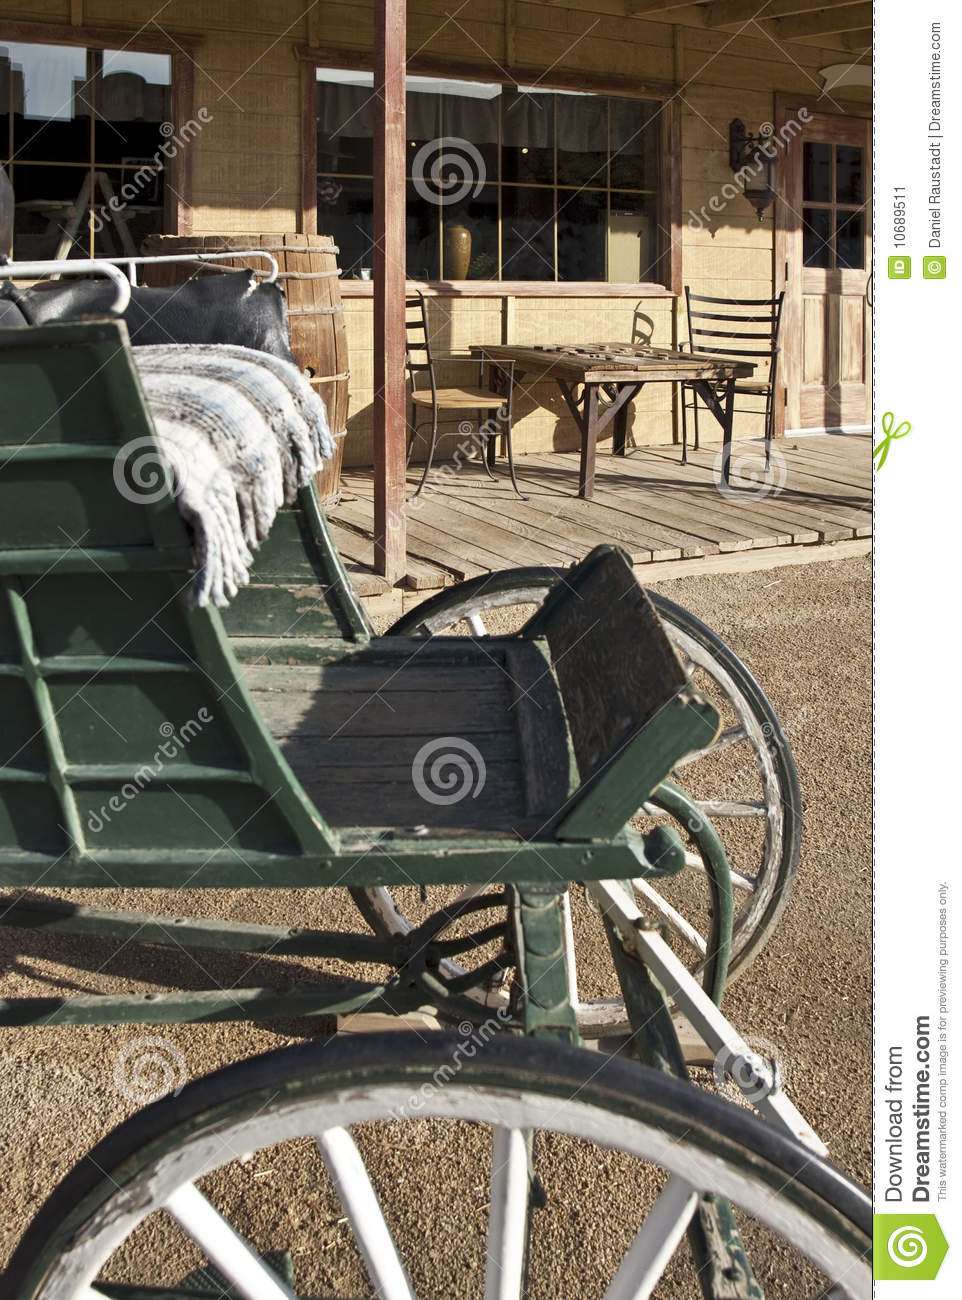 More Similar Stock Images Of   Old Western Buggy And General Store  